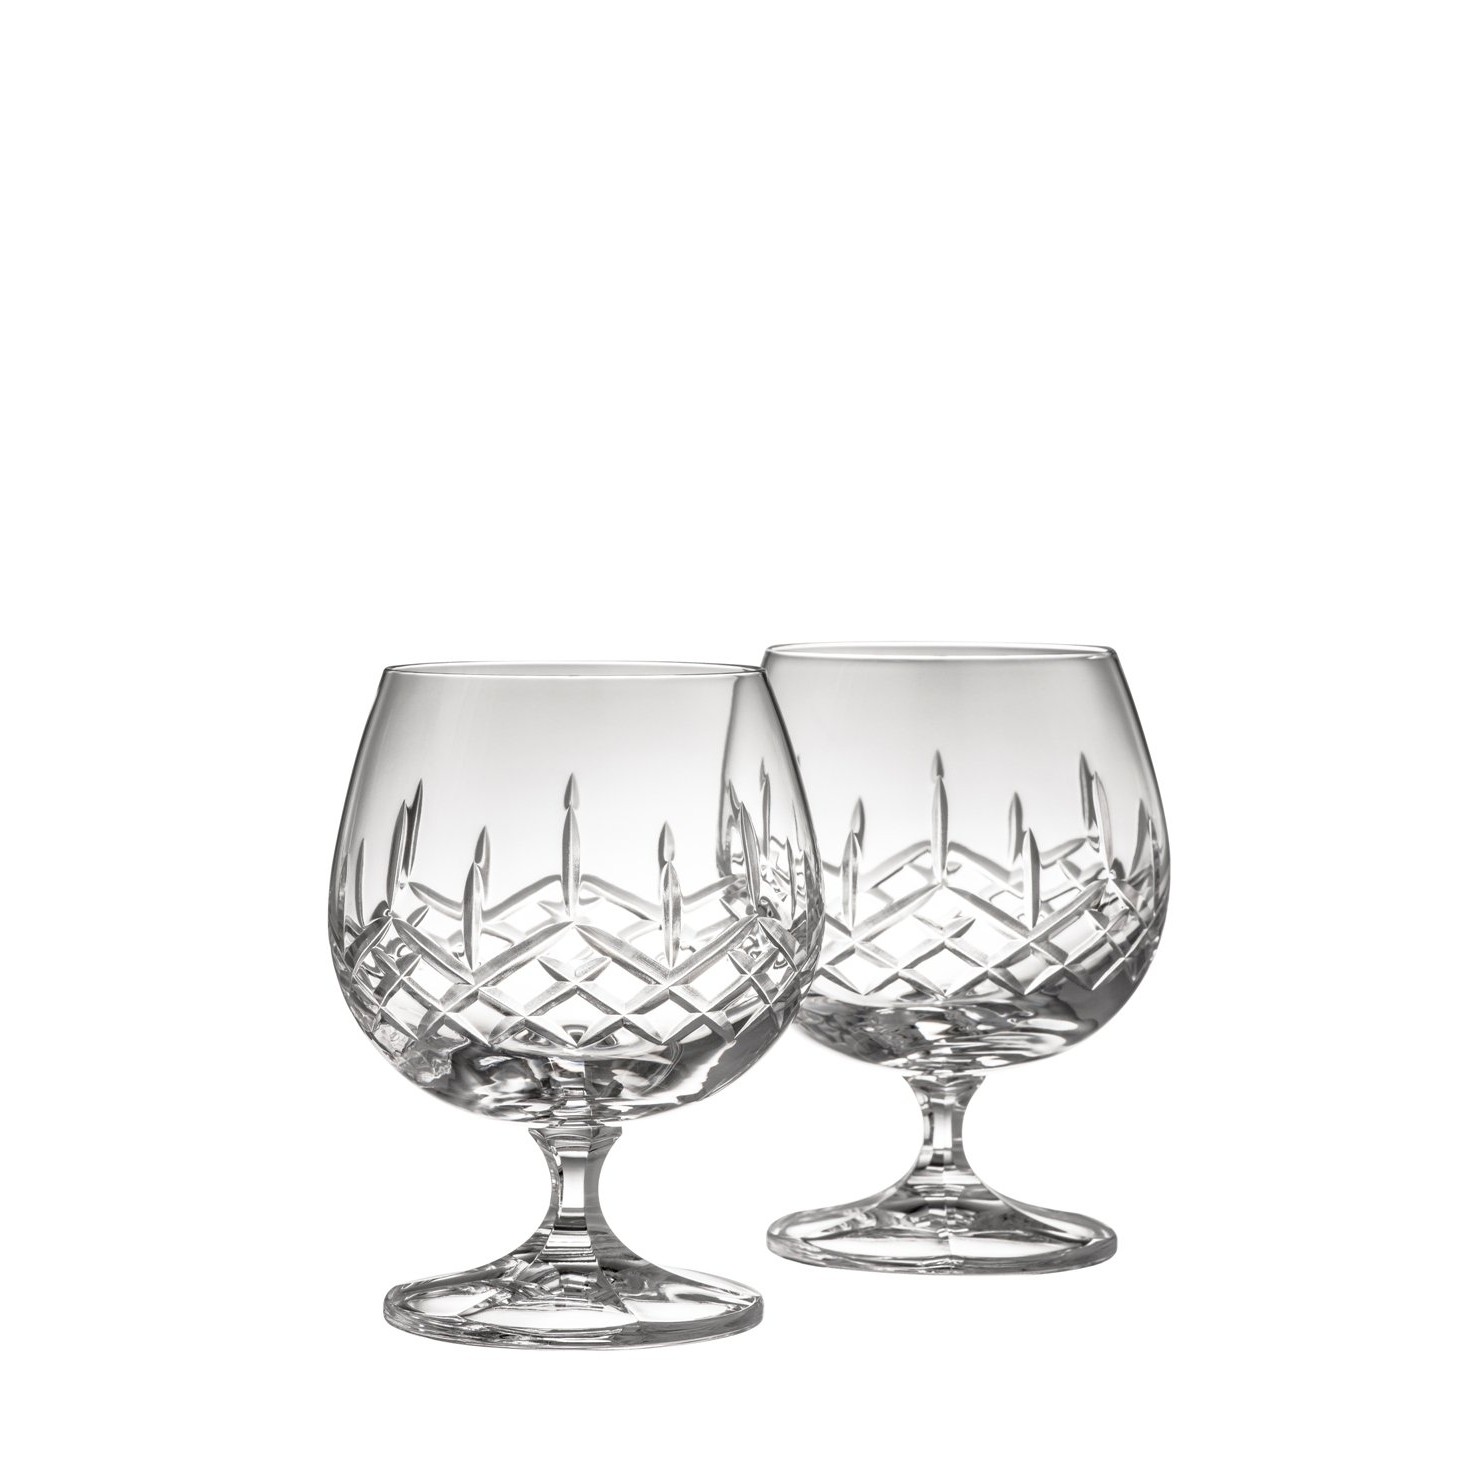 Galway Crystal Brandy Crystal Glasses Gifts For Home Tableware at Irish on  Grand